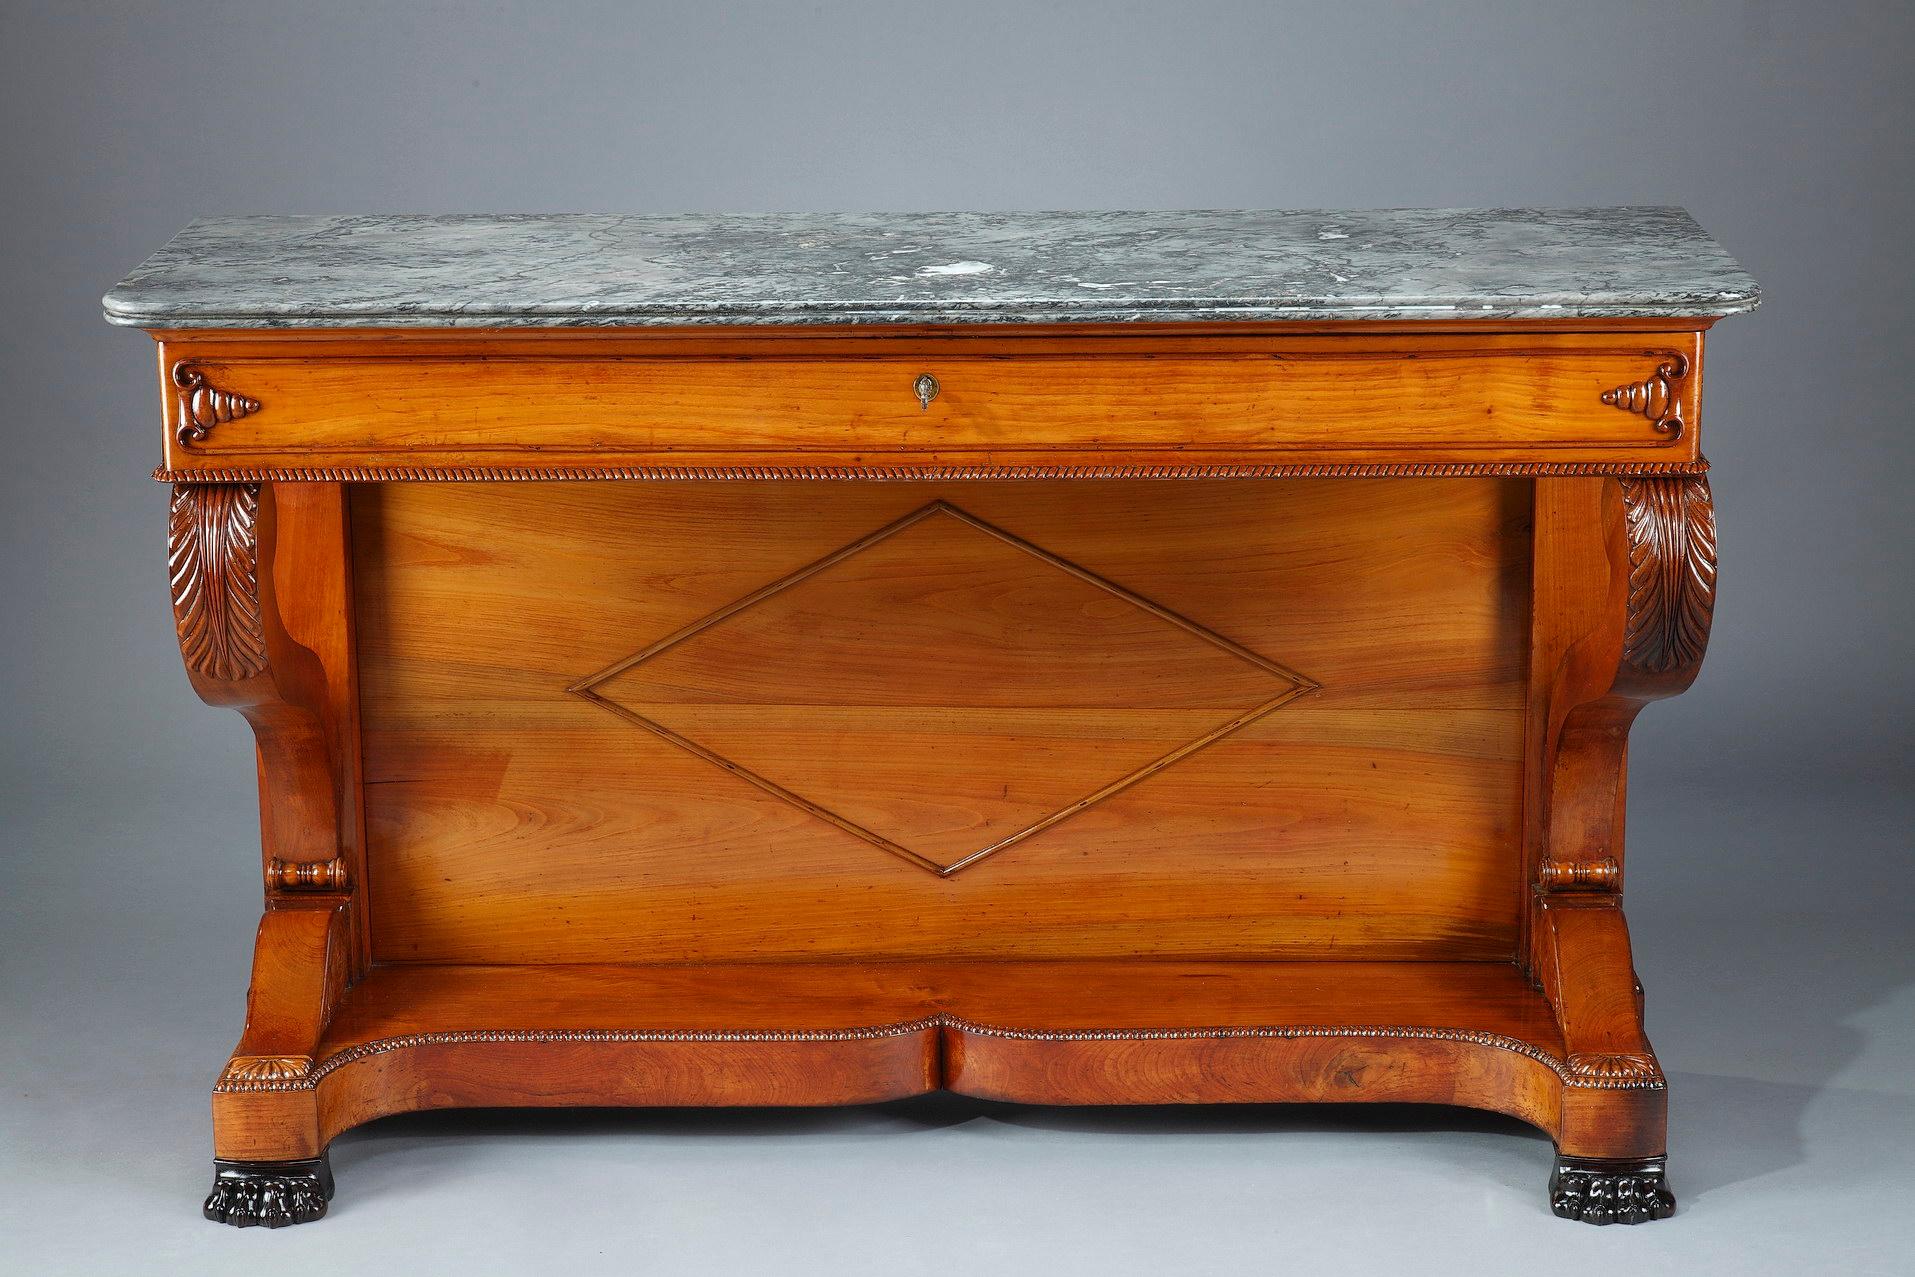 Large console in cherry wood from the Restoration period opening with a large drawer in the belt closed by a lock. The uprights are carved with water leaves and finished with claw feet joined by a moving strut with a pearl border. Grey marble top